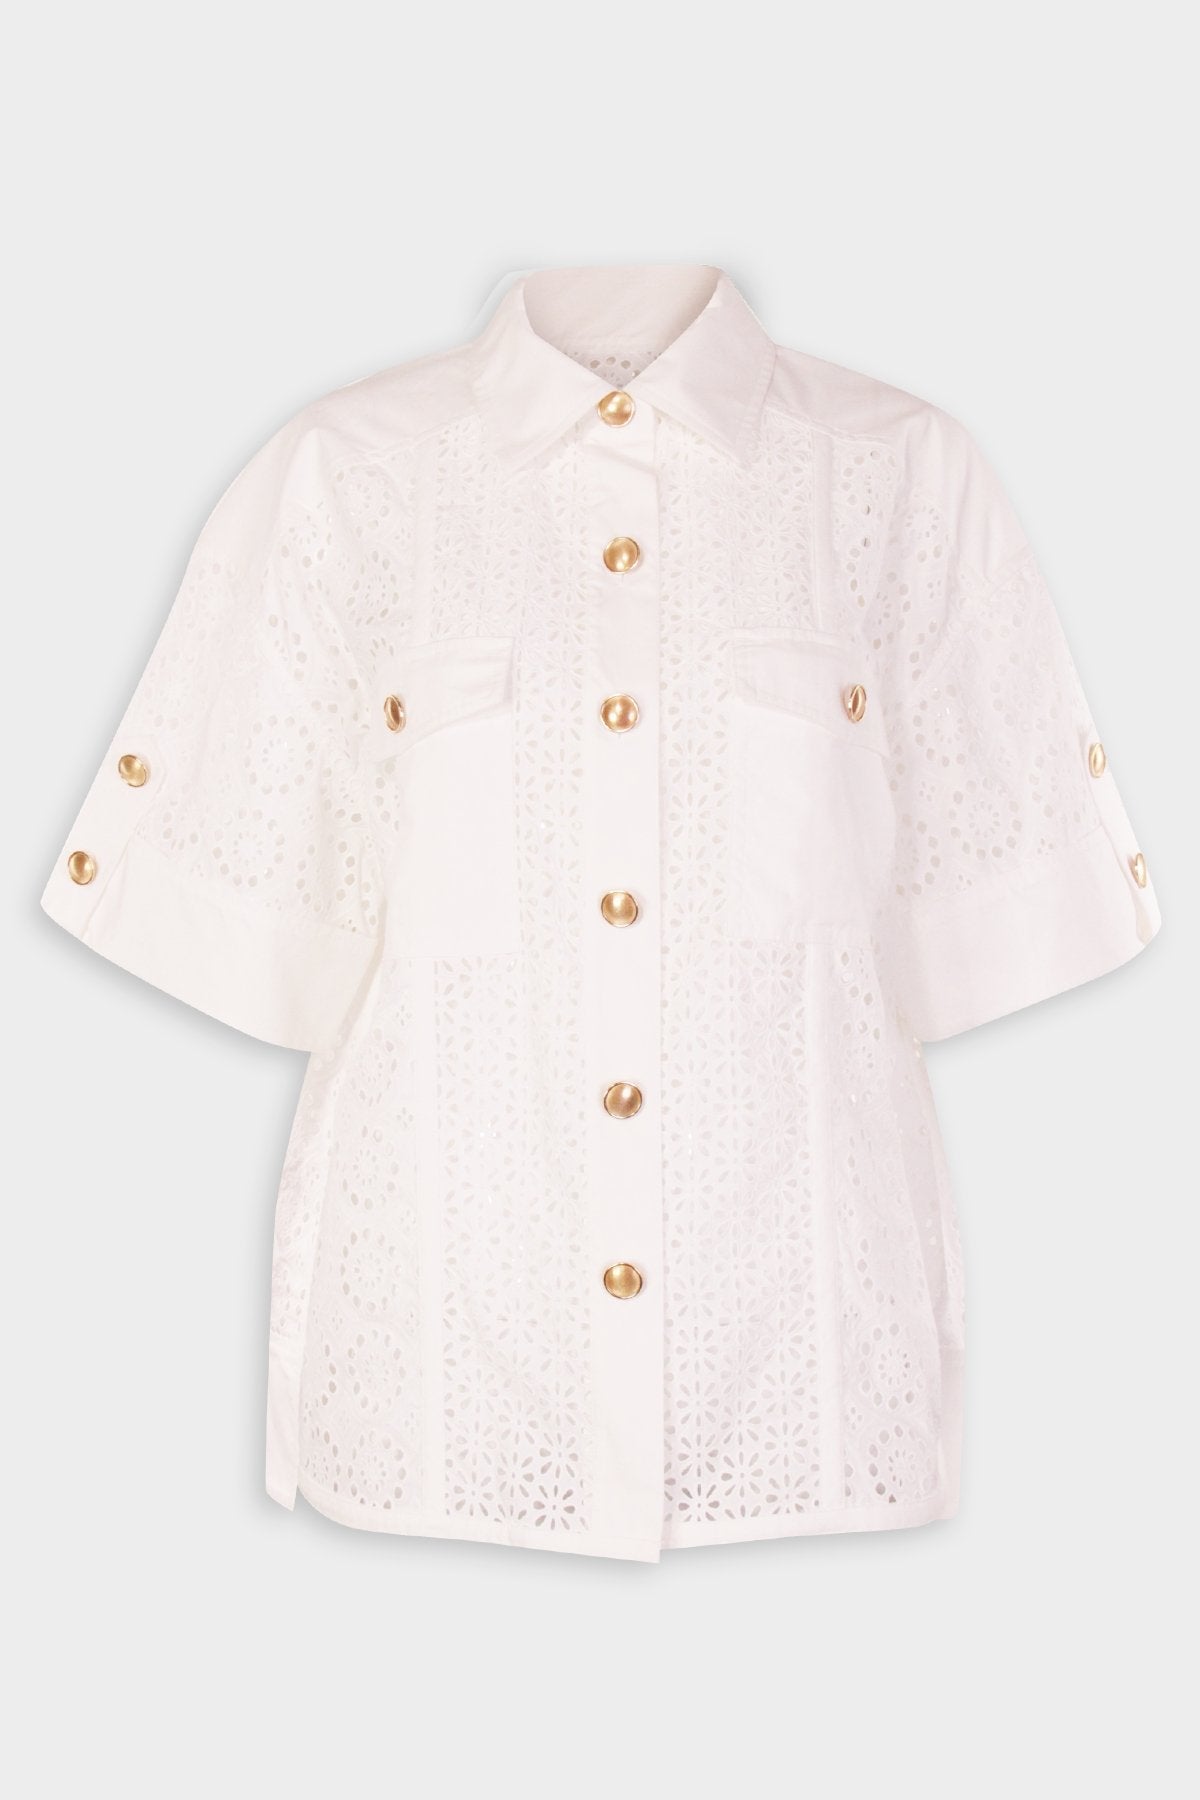 Short Sleeve Broderie Anglaise Camp Shirt in Ivory - shop-olivia.com